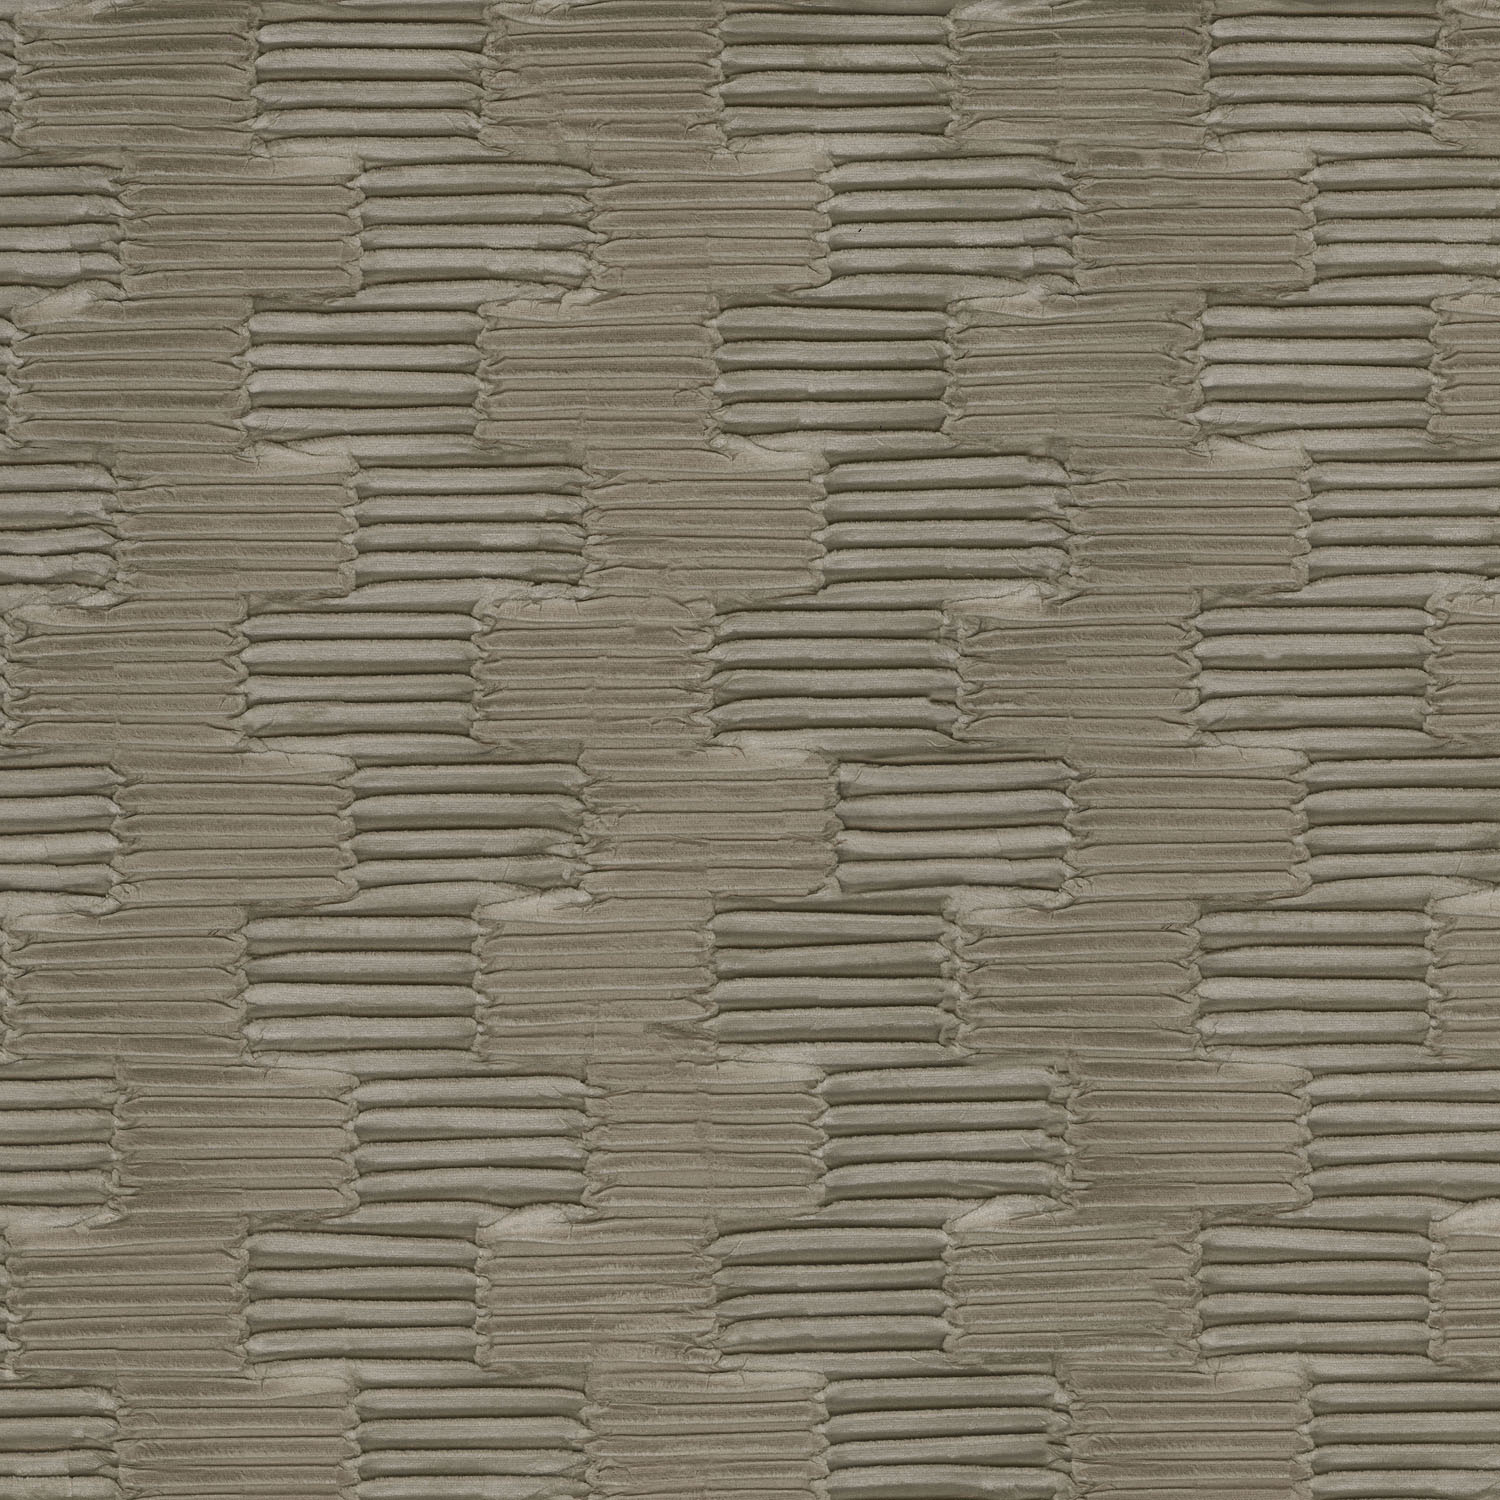 VUCHI/TAUPE - Upholstery Only Fabric Suitable For Upholstery And Pillows Only.   - Ft Worth